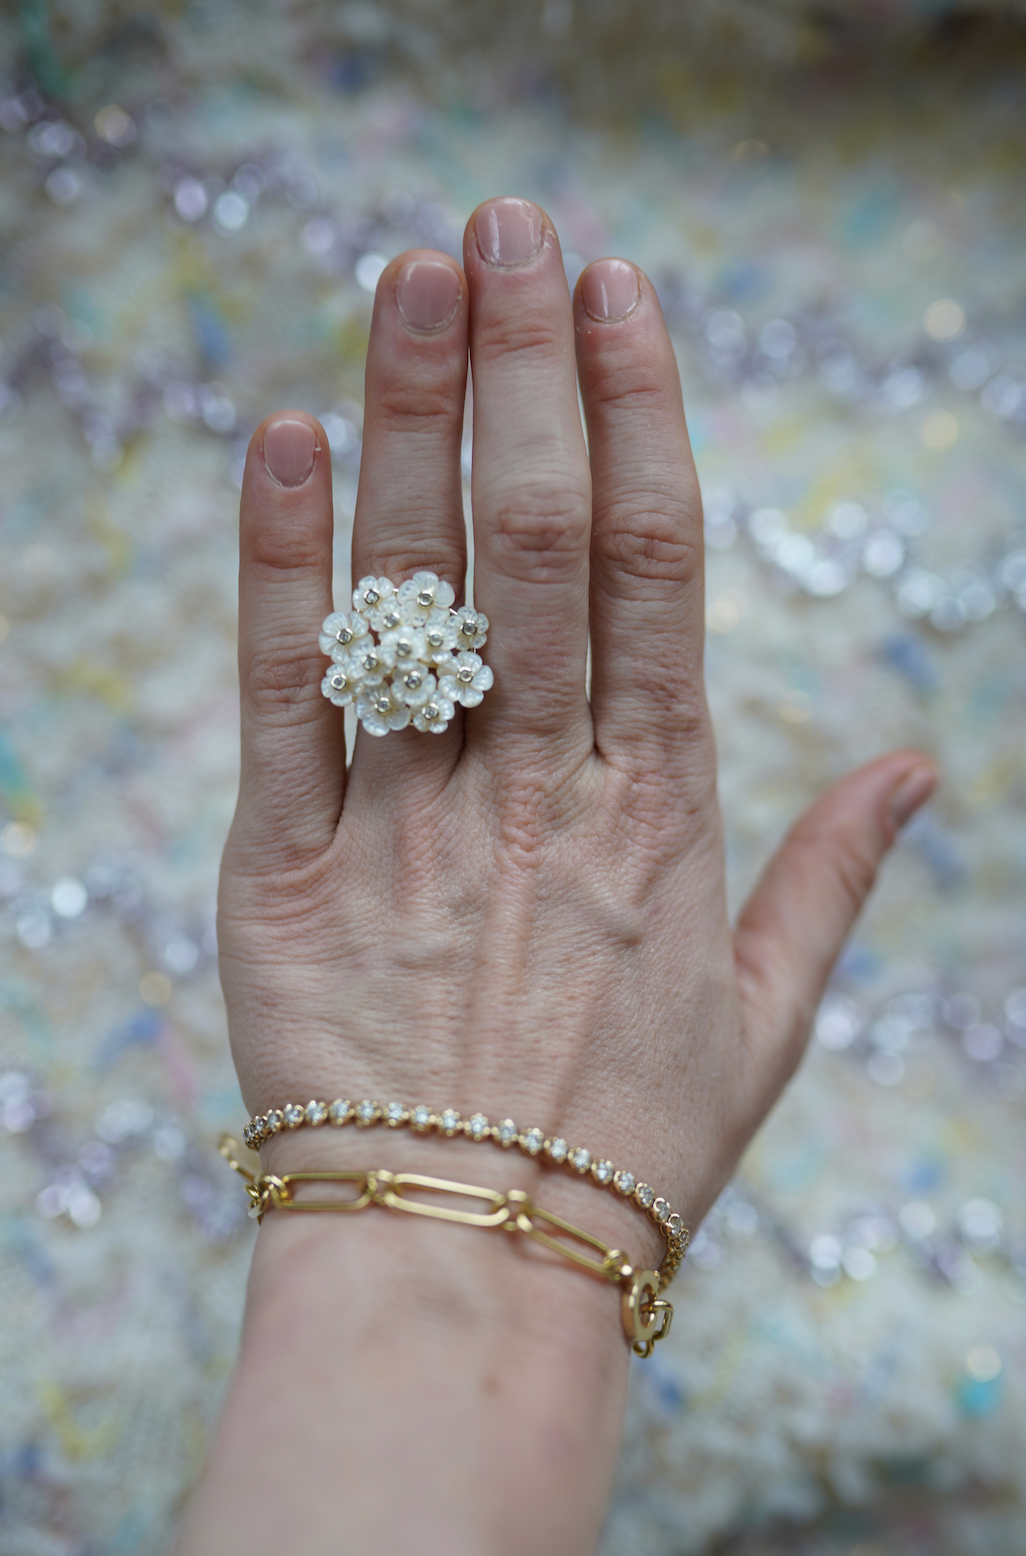 Mother of Pearl Blossom ring